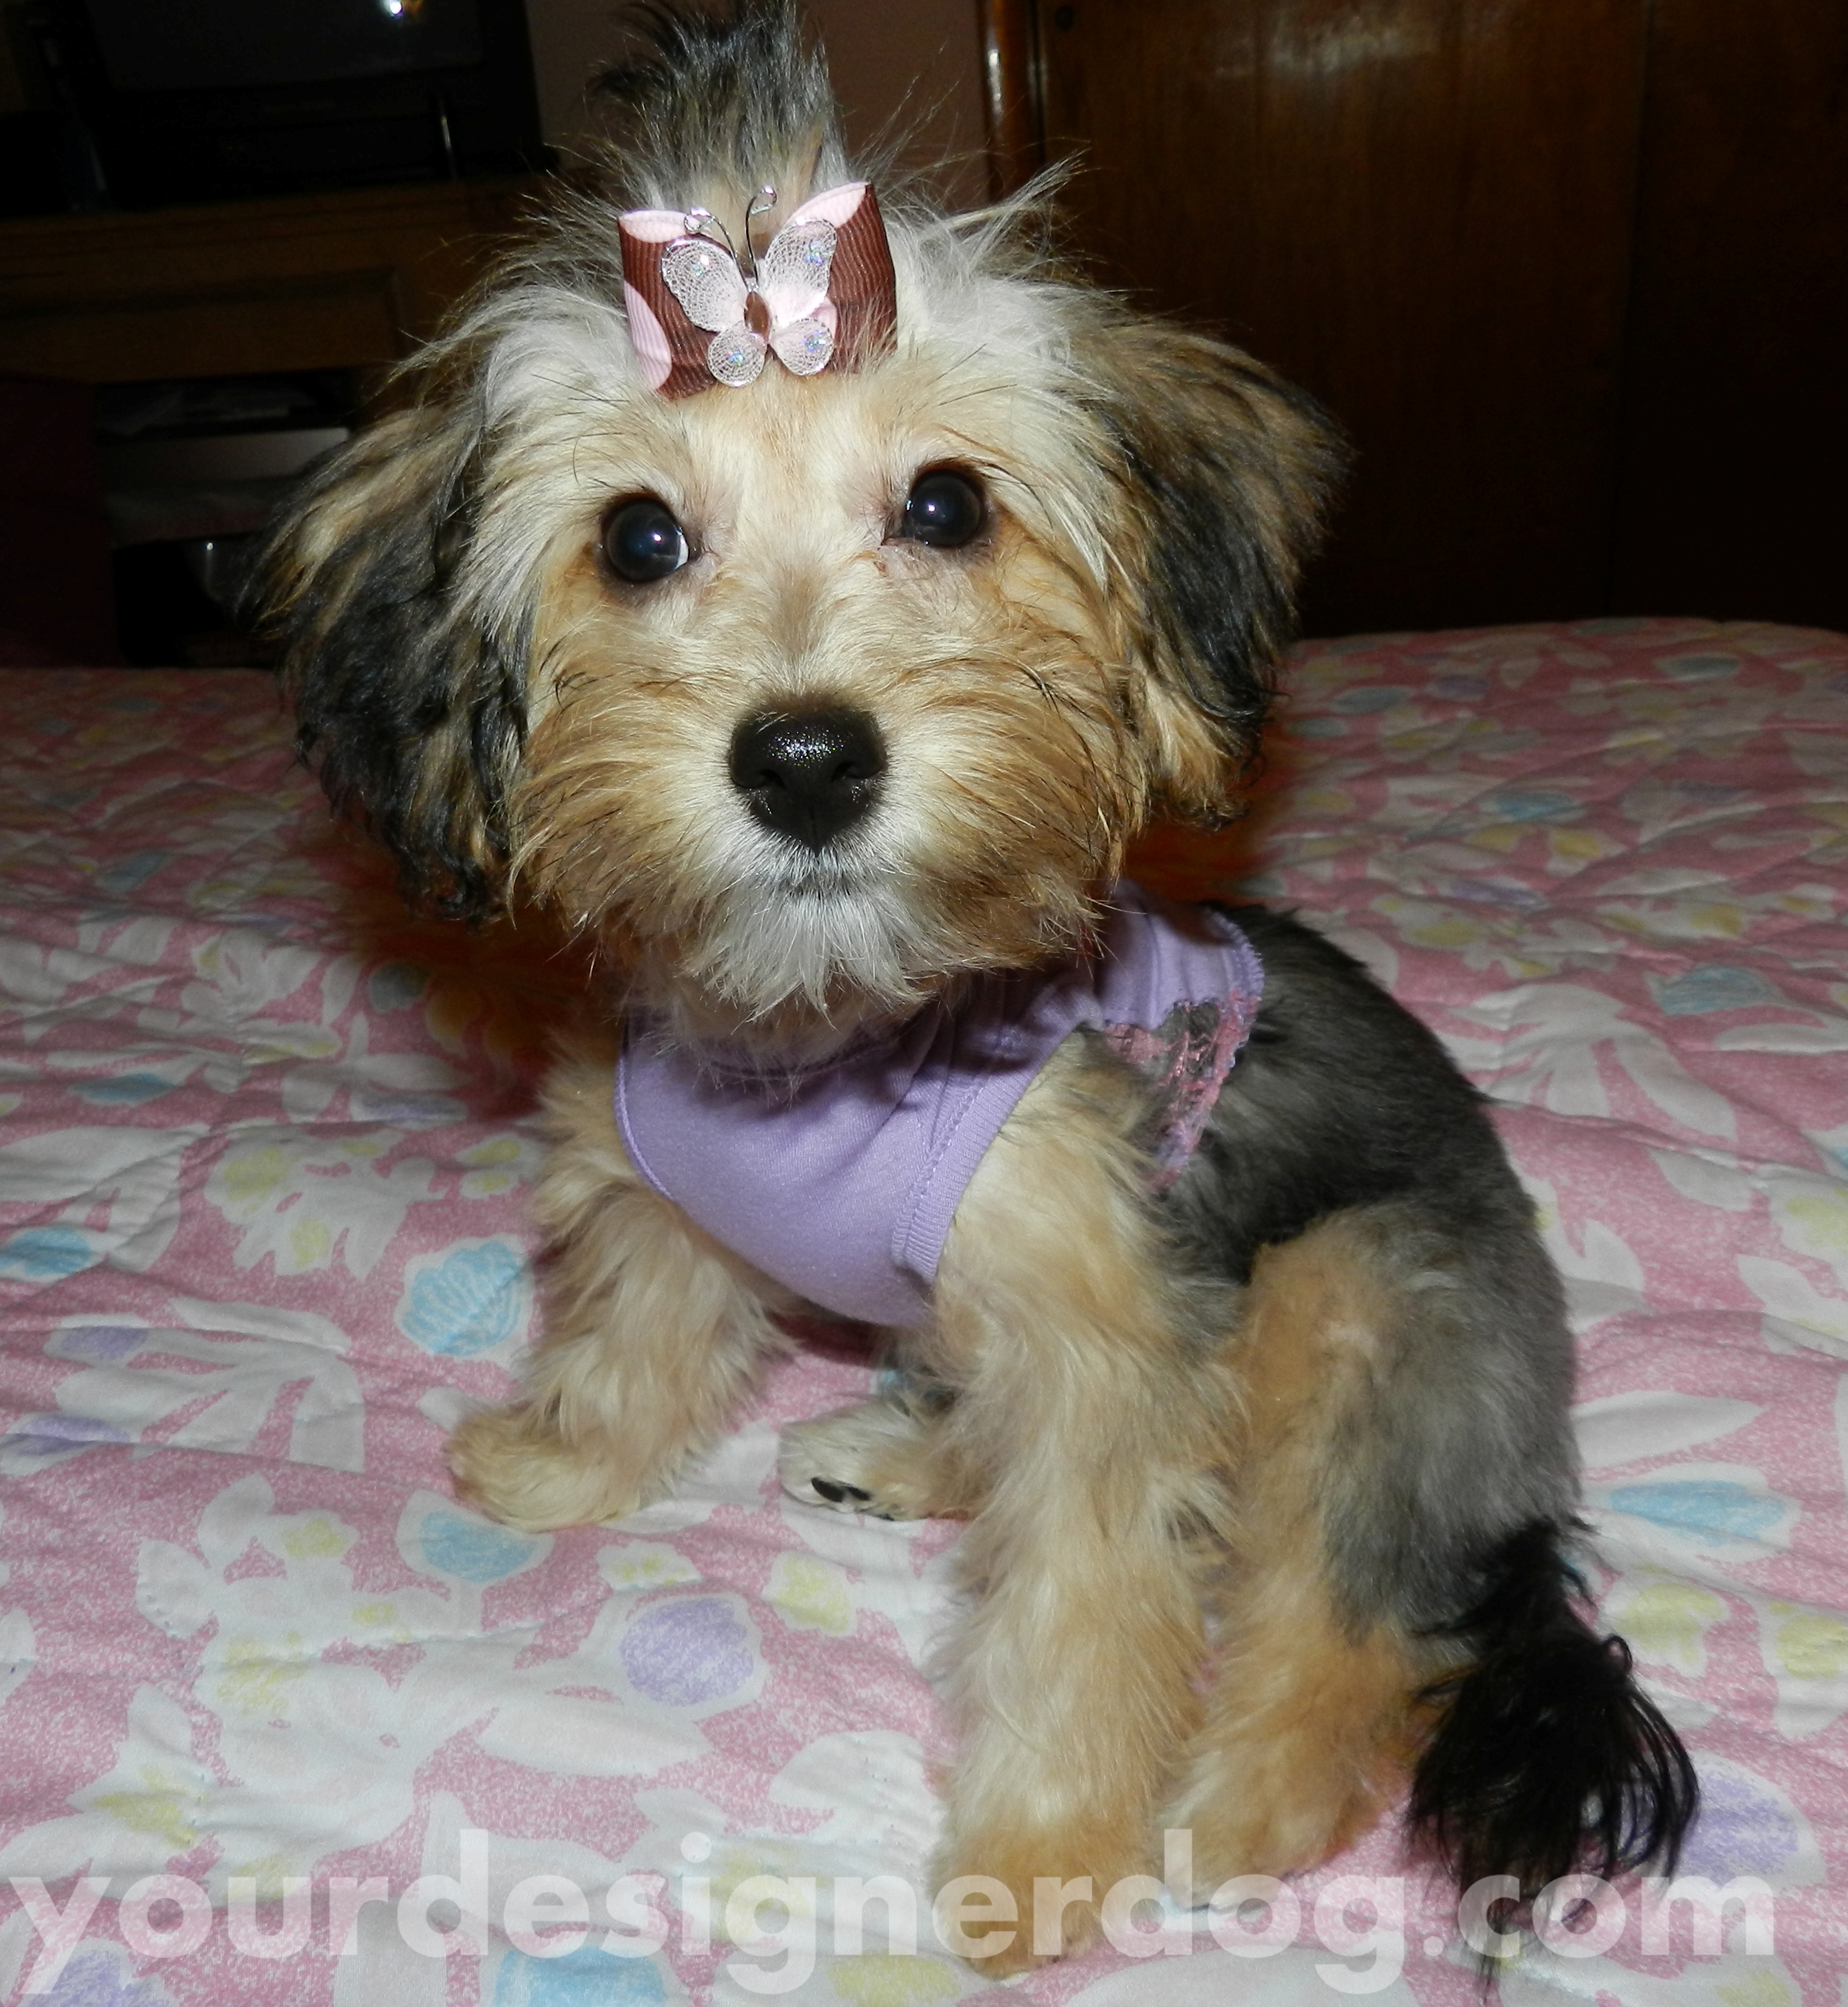 dogs, designer dogs, yorkipoo, yorkie poo, puppy, cute puppy pictures